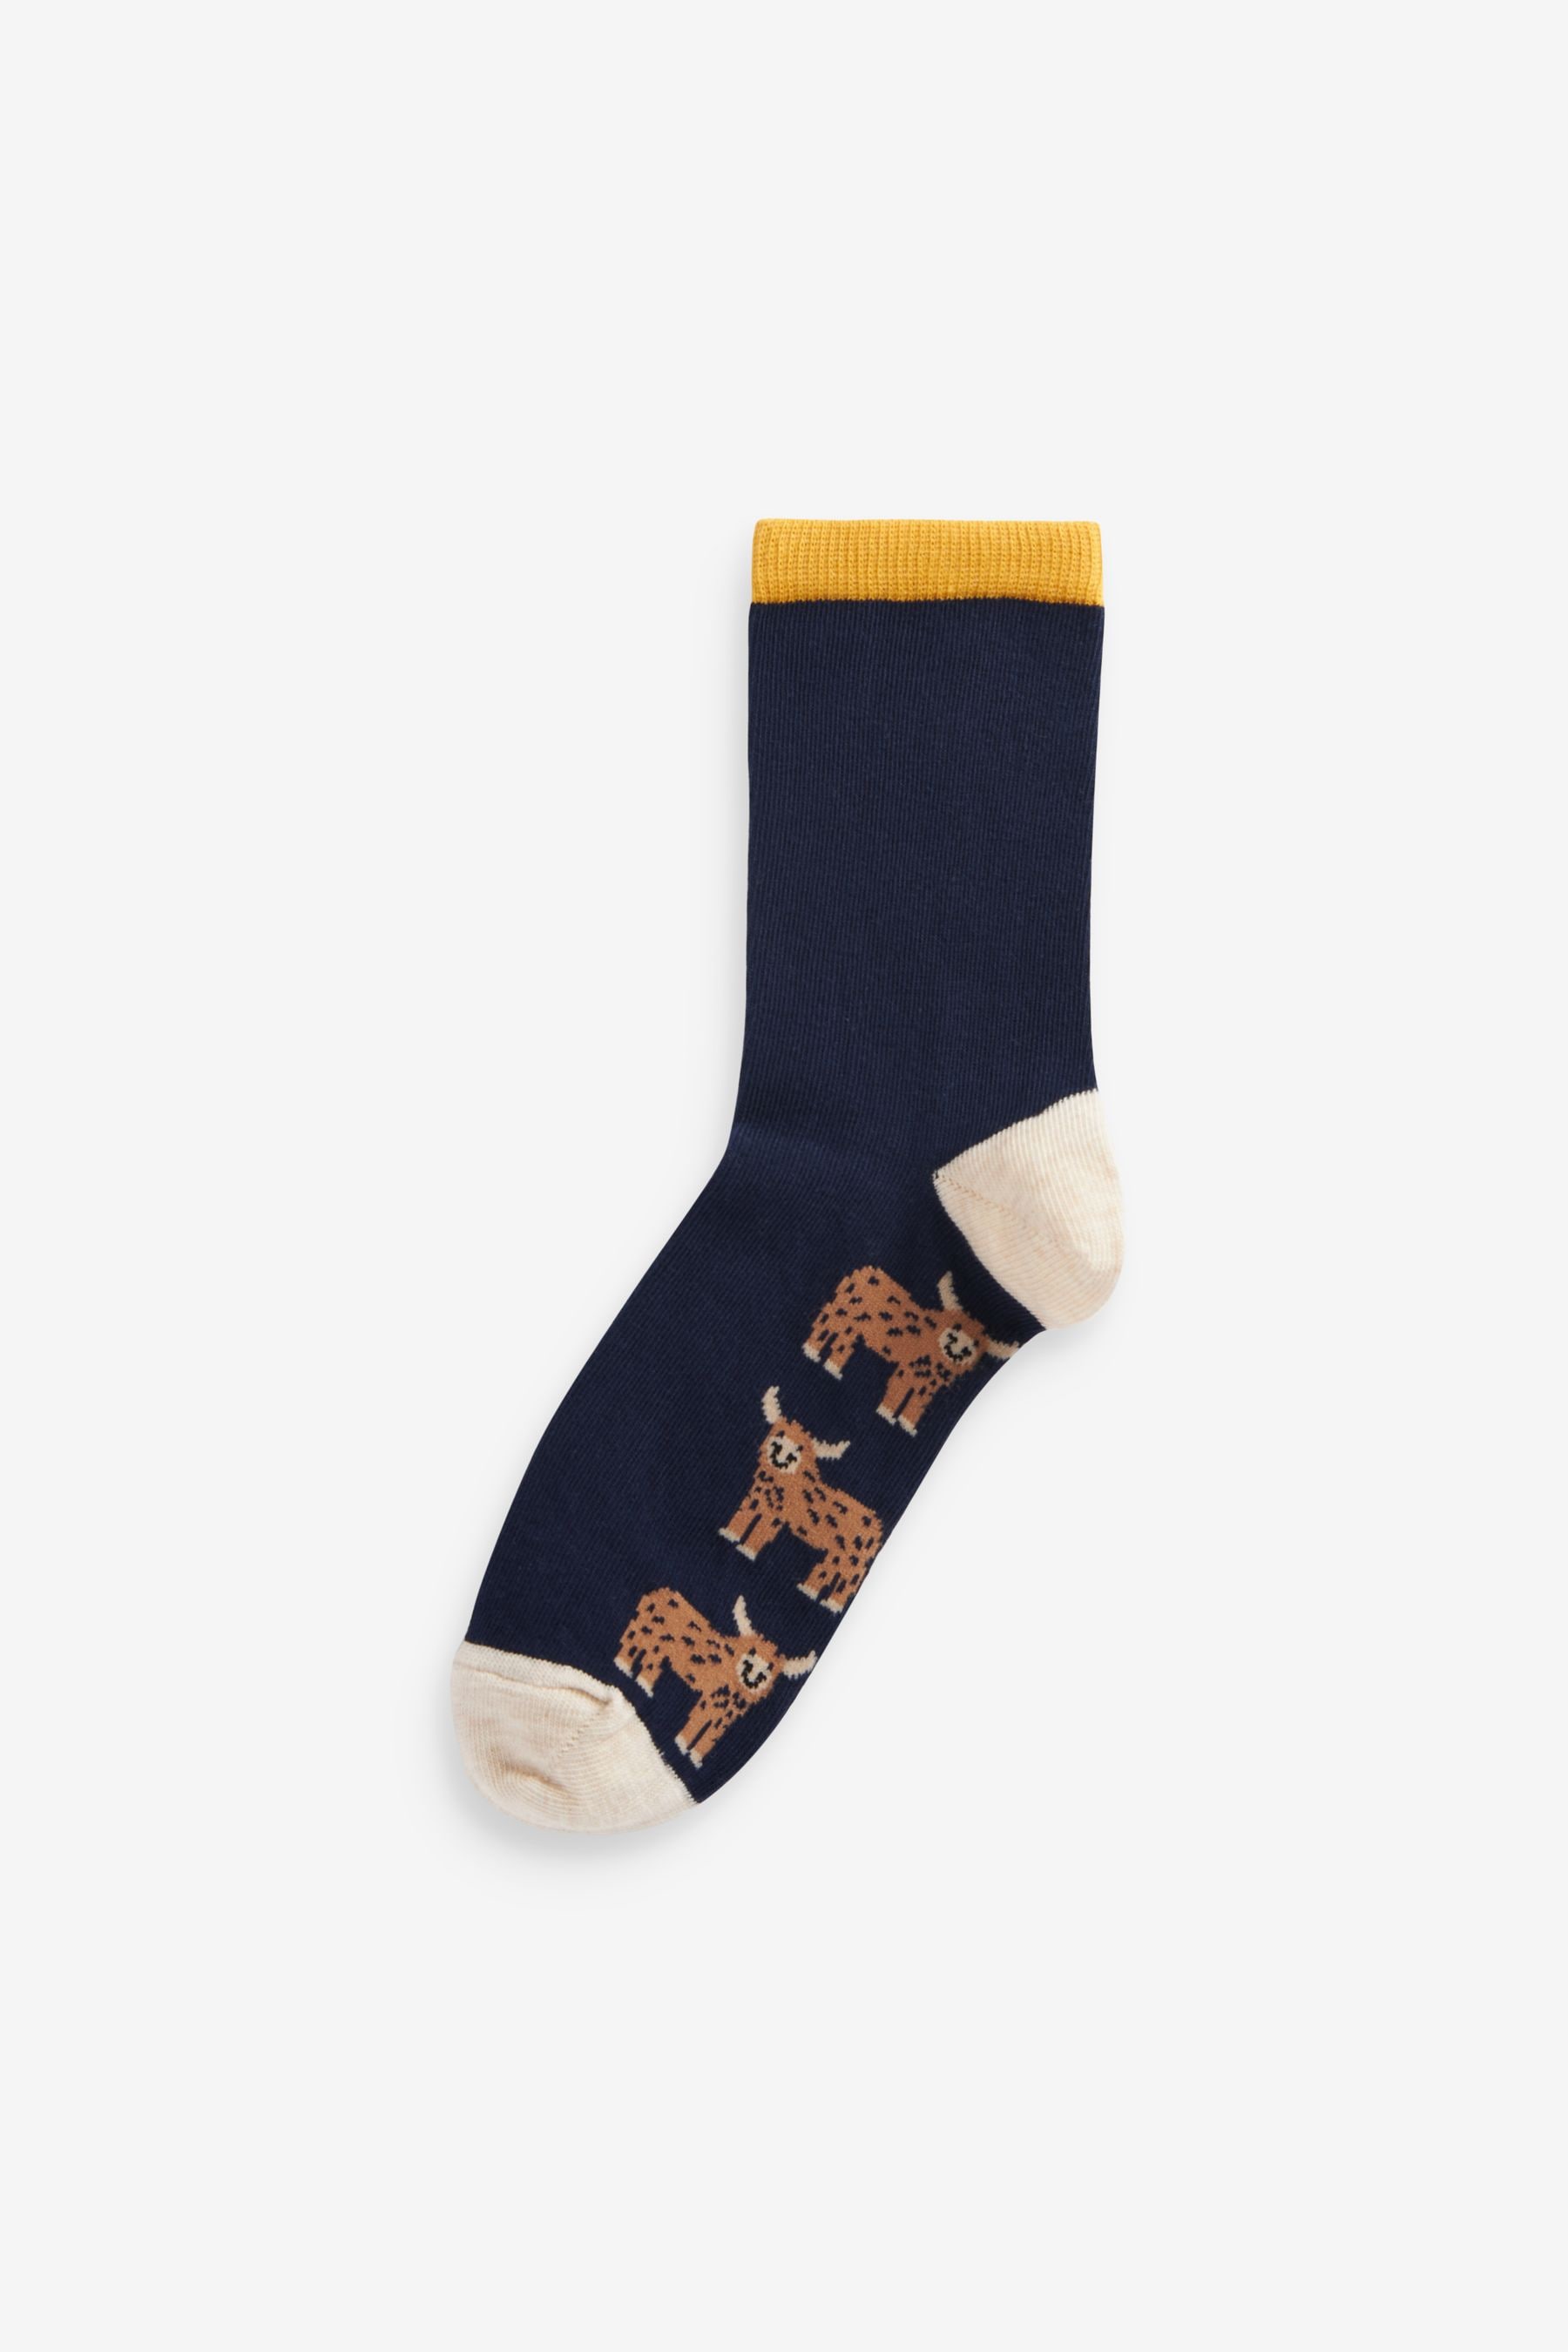 Buy Yellow/Cream Hamish Highland Cow Ankle Socks 4 Pack from the Next ...